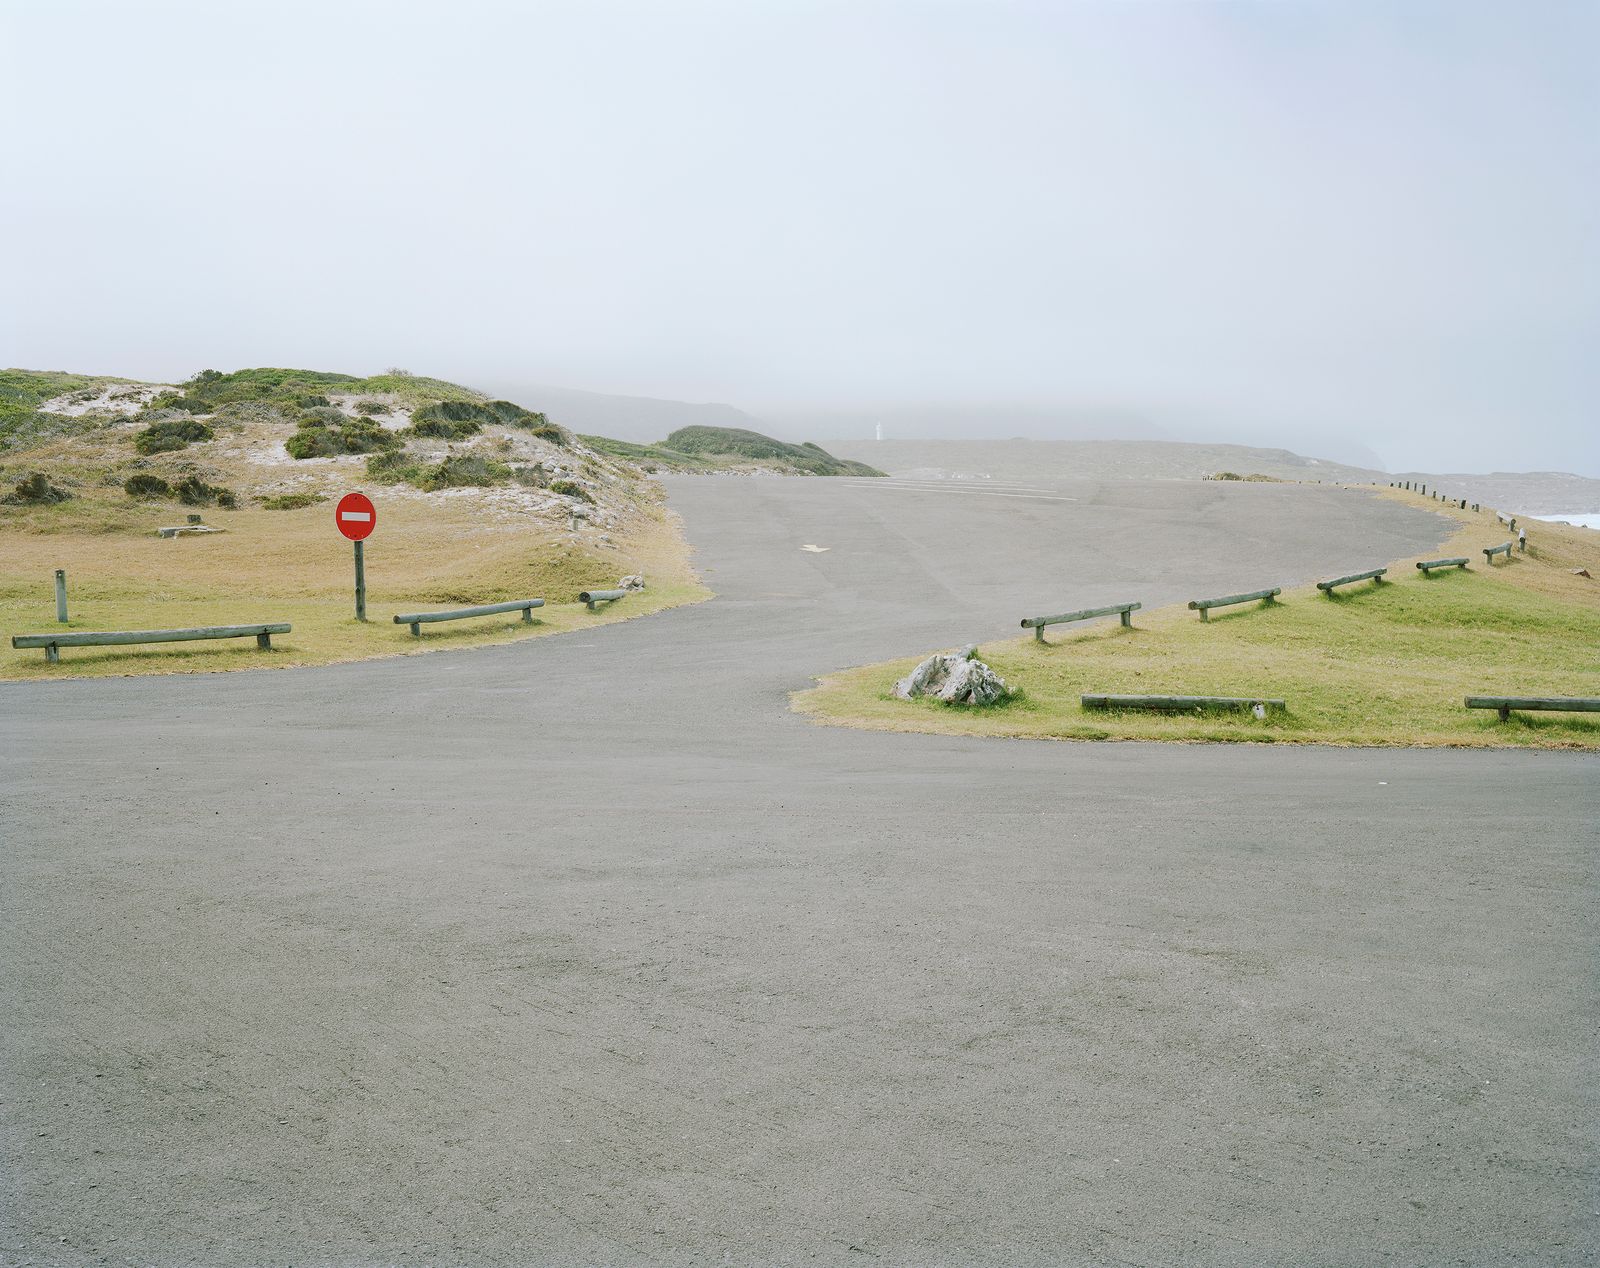 © Vincent Bezuidenhout - Image from the Separate Amenities photography project